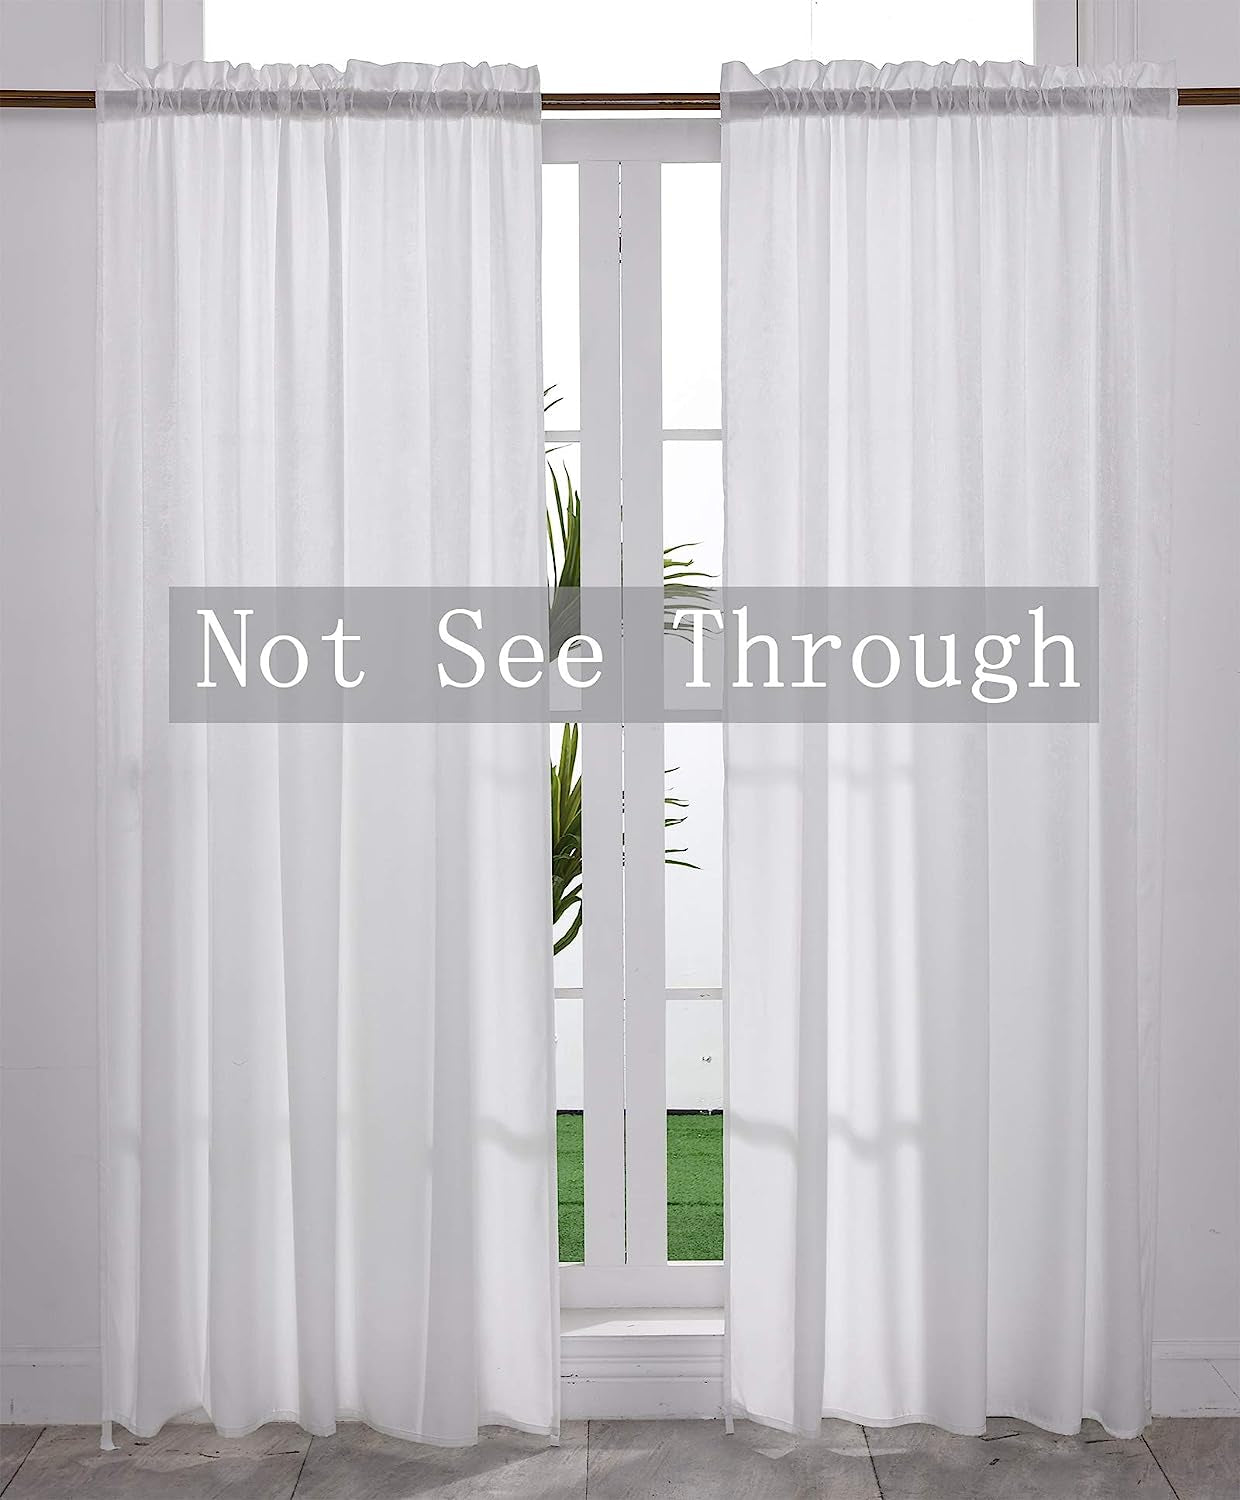 Yancorp Non-See-Through Velvet Opaque Privacy Curtains 2 Panels Drapes for Living Room Bedroom Doorway Divider Semi Sheer Curtain Kithen Window Panels (White, W52 Xl84)  Yancorp   